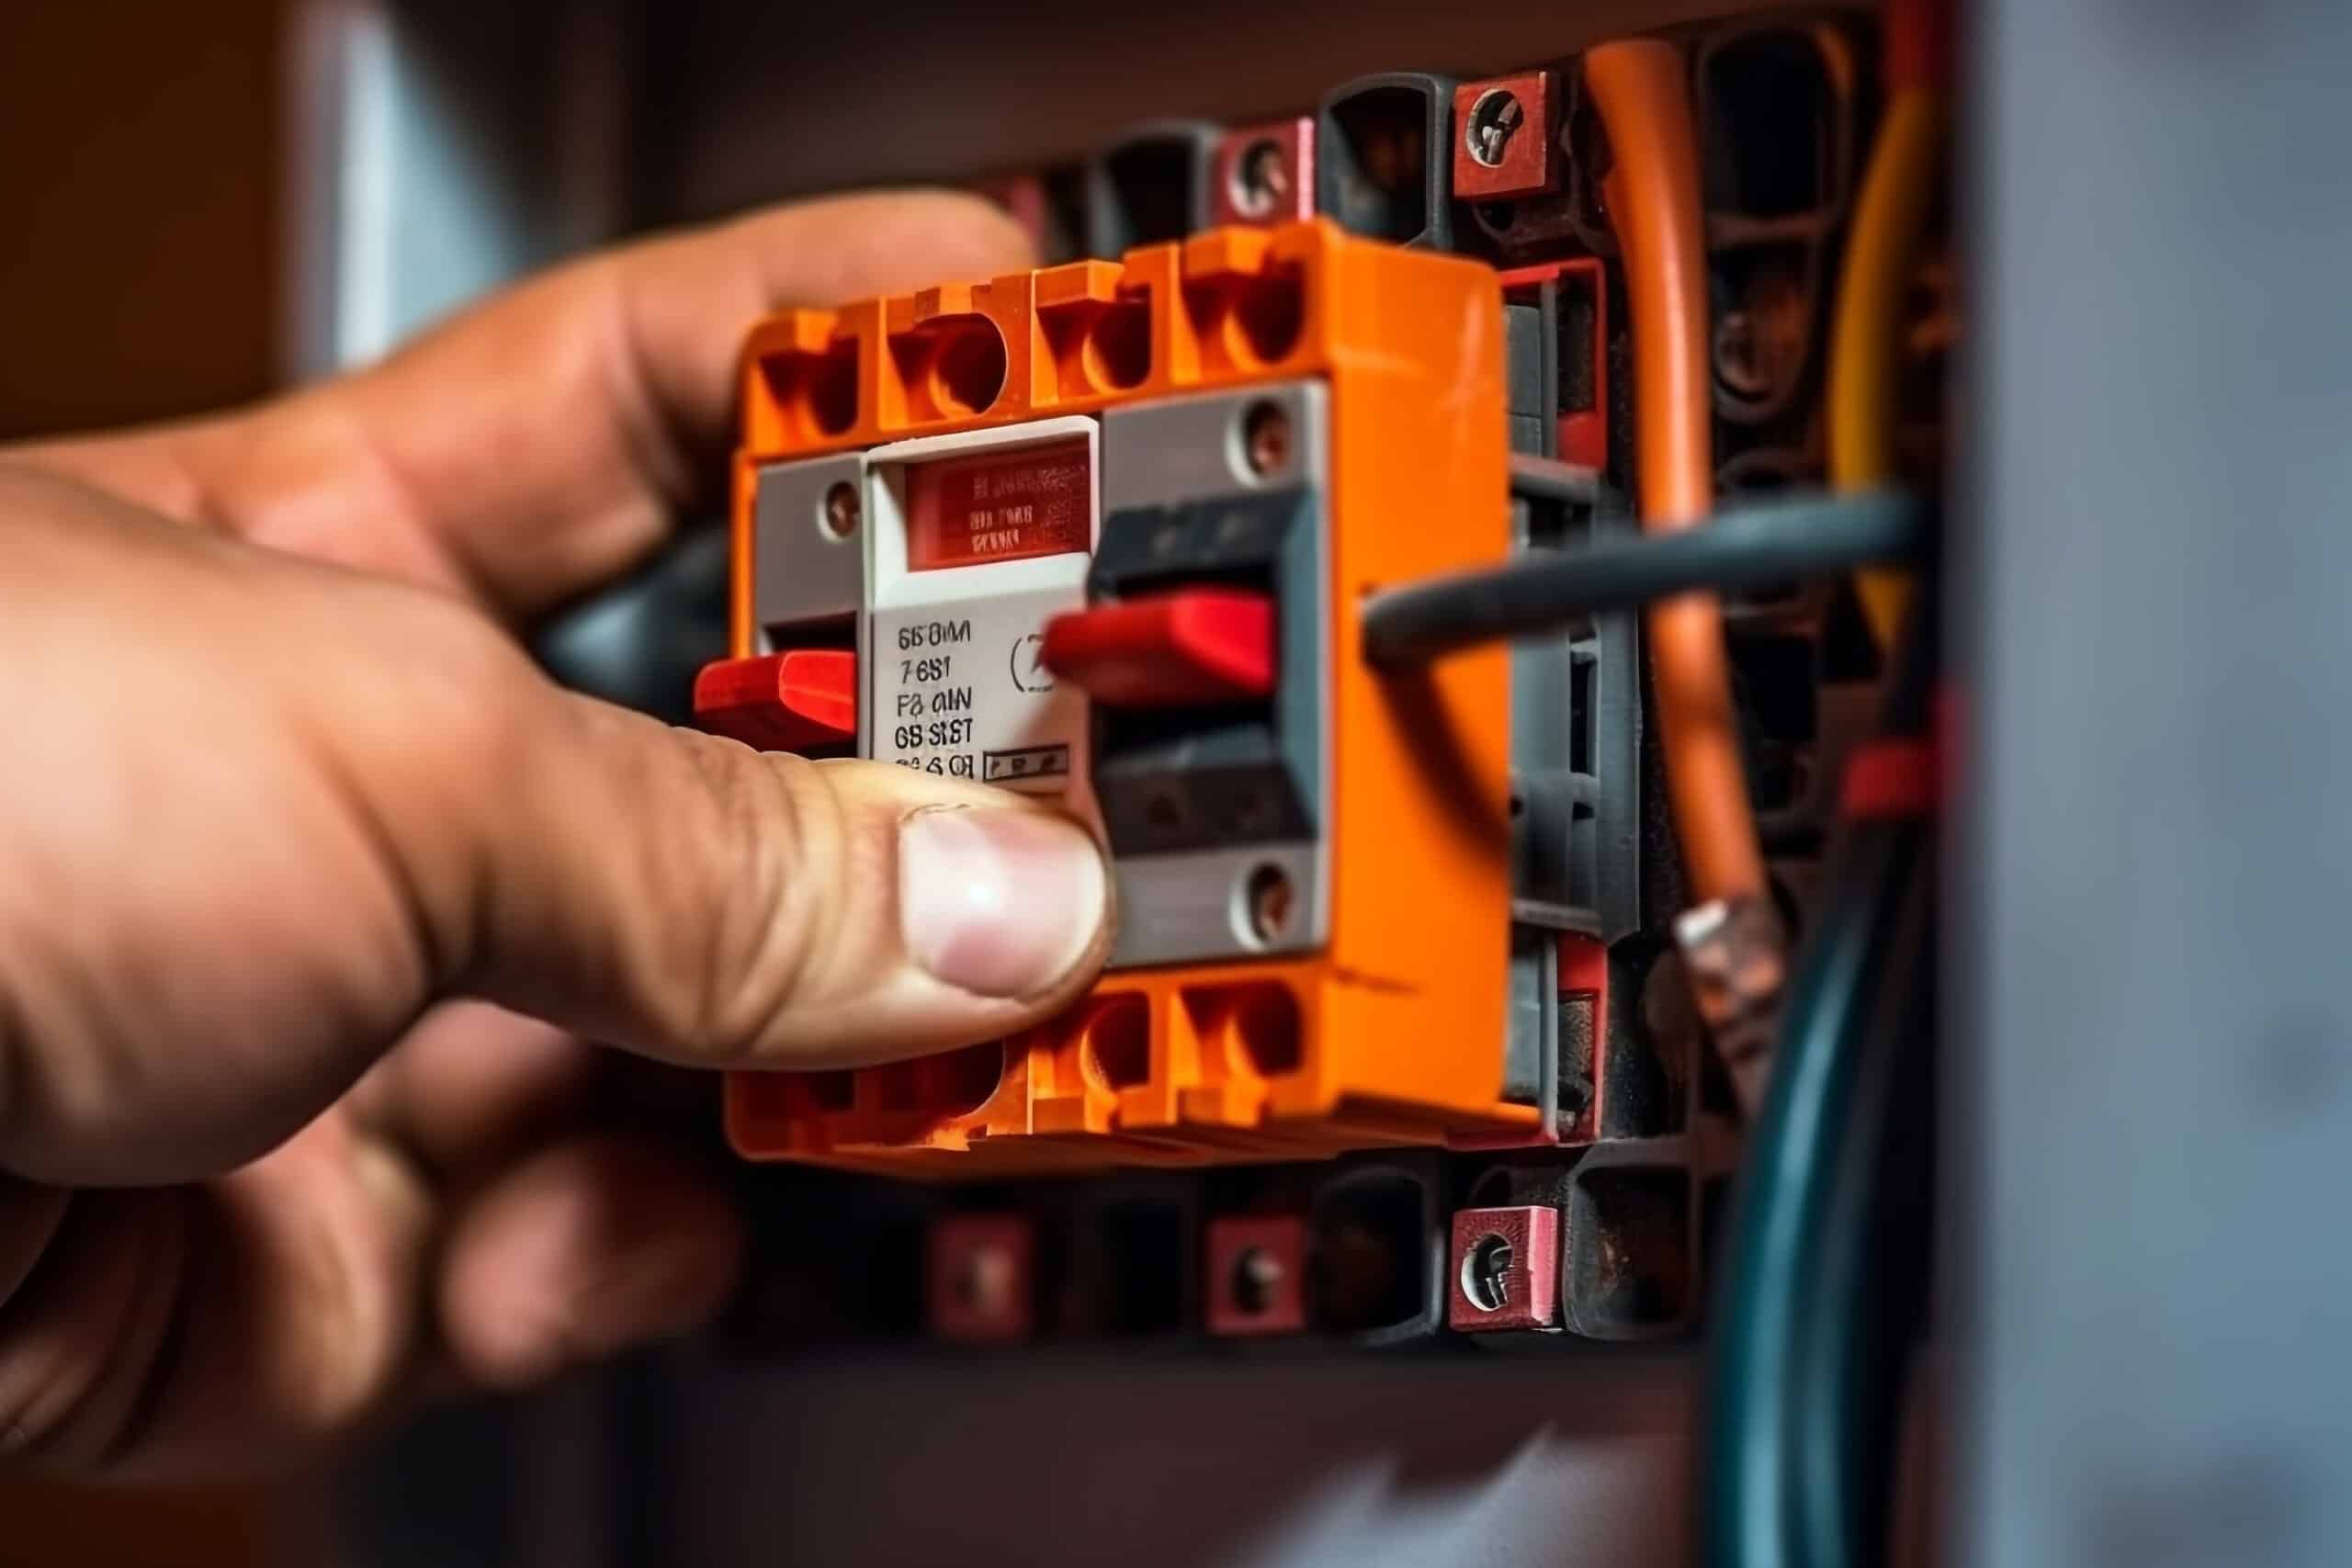 www.appr.com : How to safely install a transfer switch for a home generator?